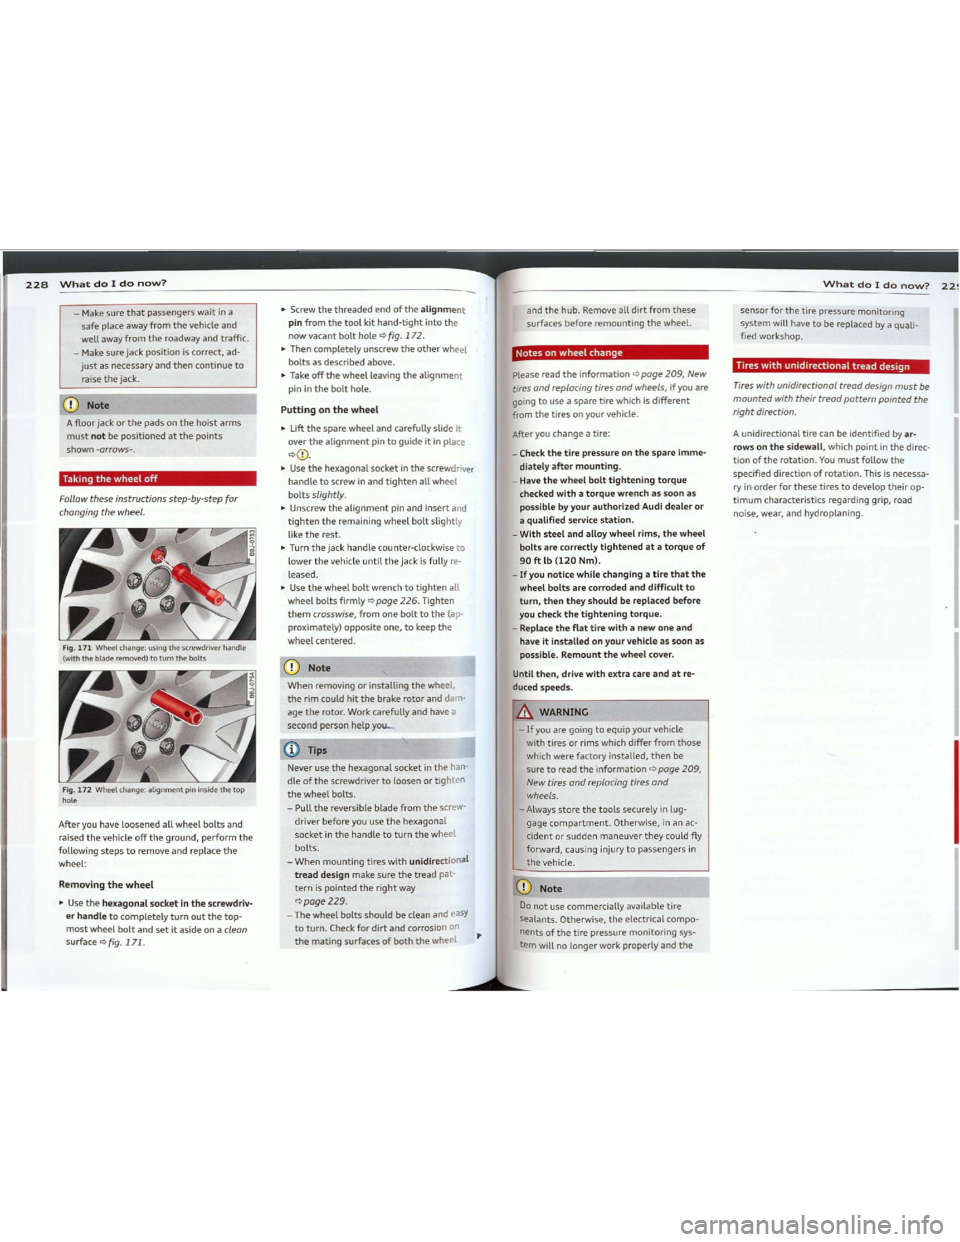 AUDI TT 2012  Owners Manual Downloaded from www.Manualslib.com manuals search engine Whatdo1donow?22!
Afteryouchangeatire:
Notesonwheelchange
andthehub. Remove alldirtfromthese
surfaces beforeremountingthewheel.
Aunidirectional 